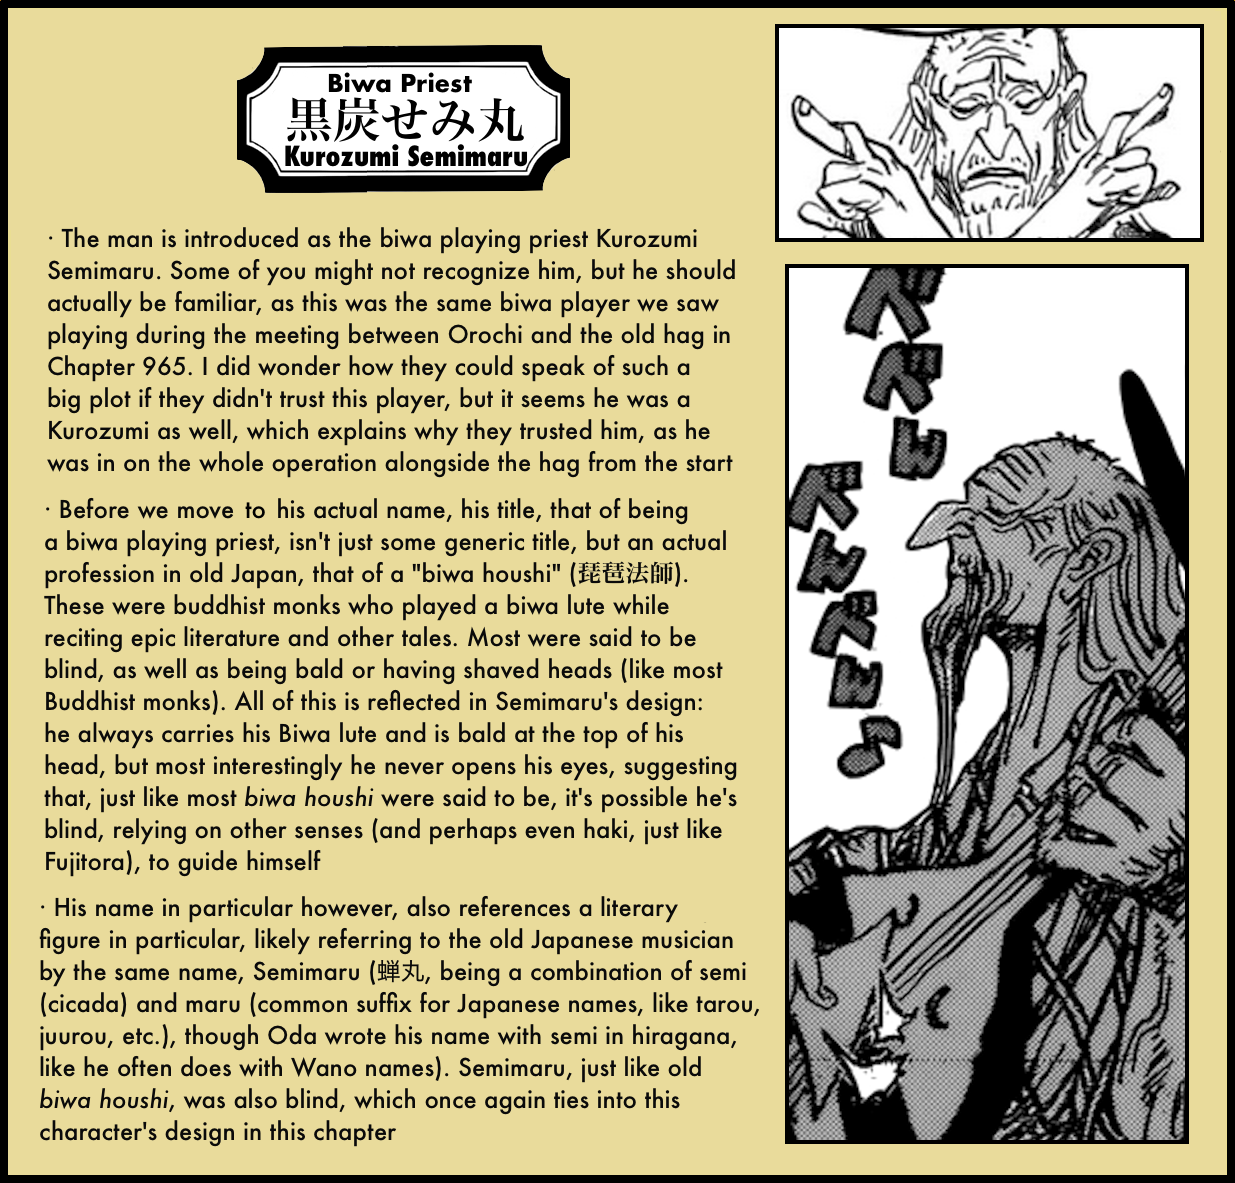 One Piece Chapter 1026 Spoilers Reddit, Recap, Release Date and Time - The  News Pocket